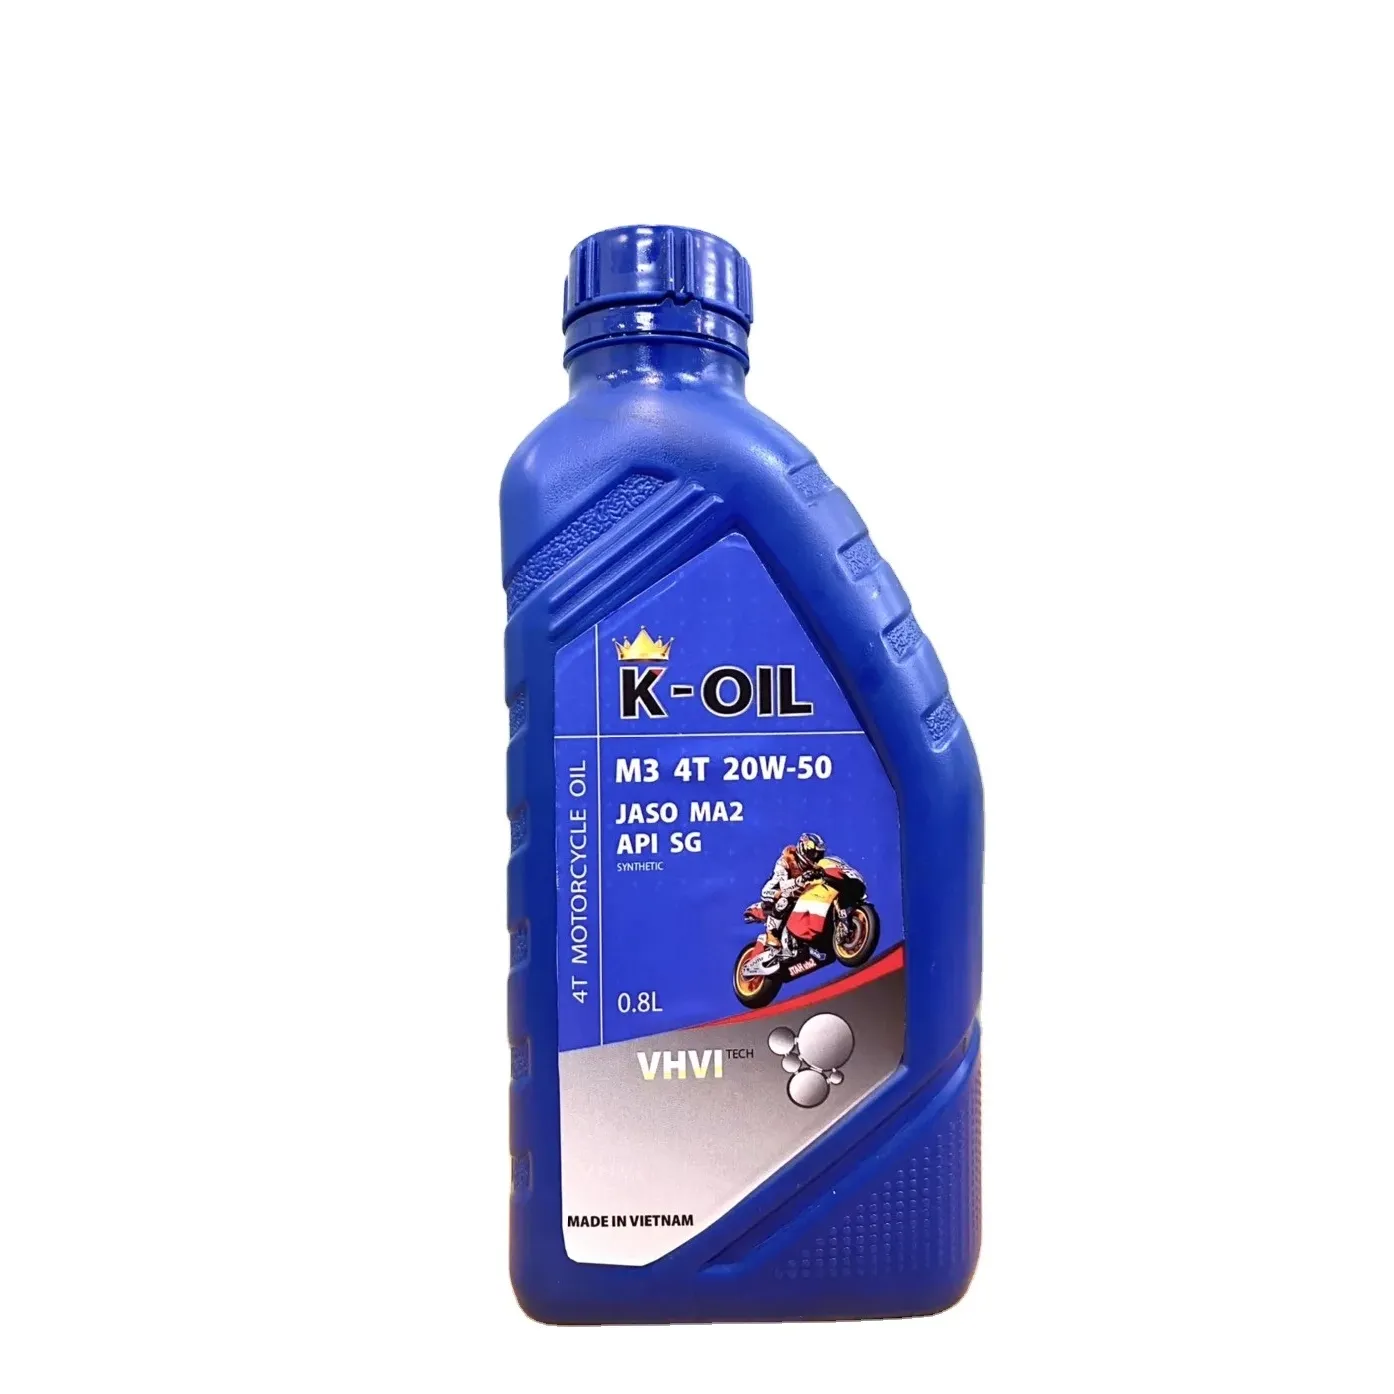 K-OIL 4T M3 20W-50 API SG Semi-Synthetic oil high quality and cheap price for motorcycle applications Vietnam